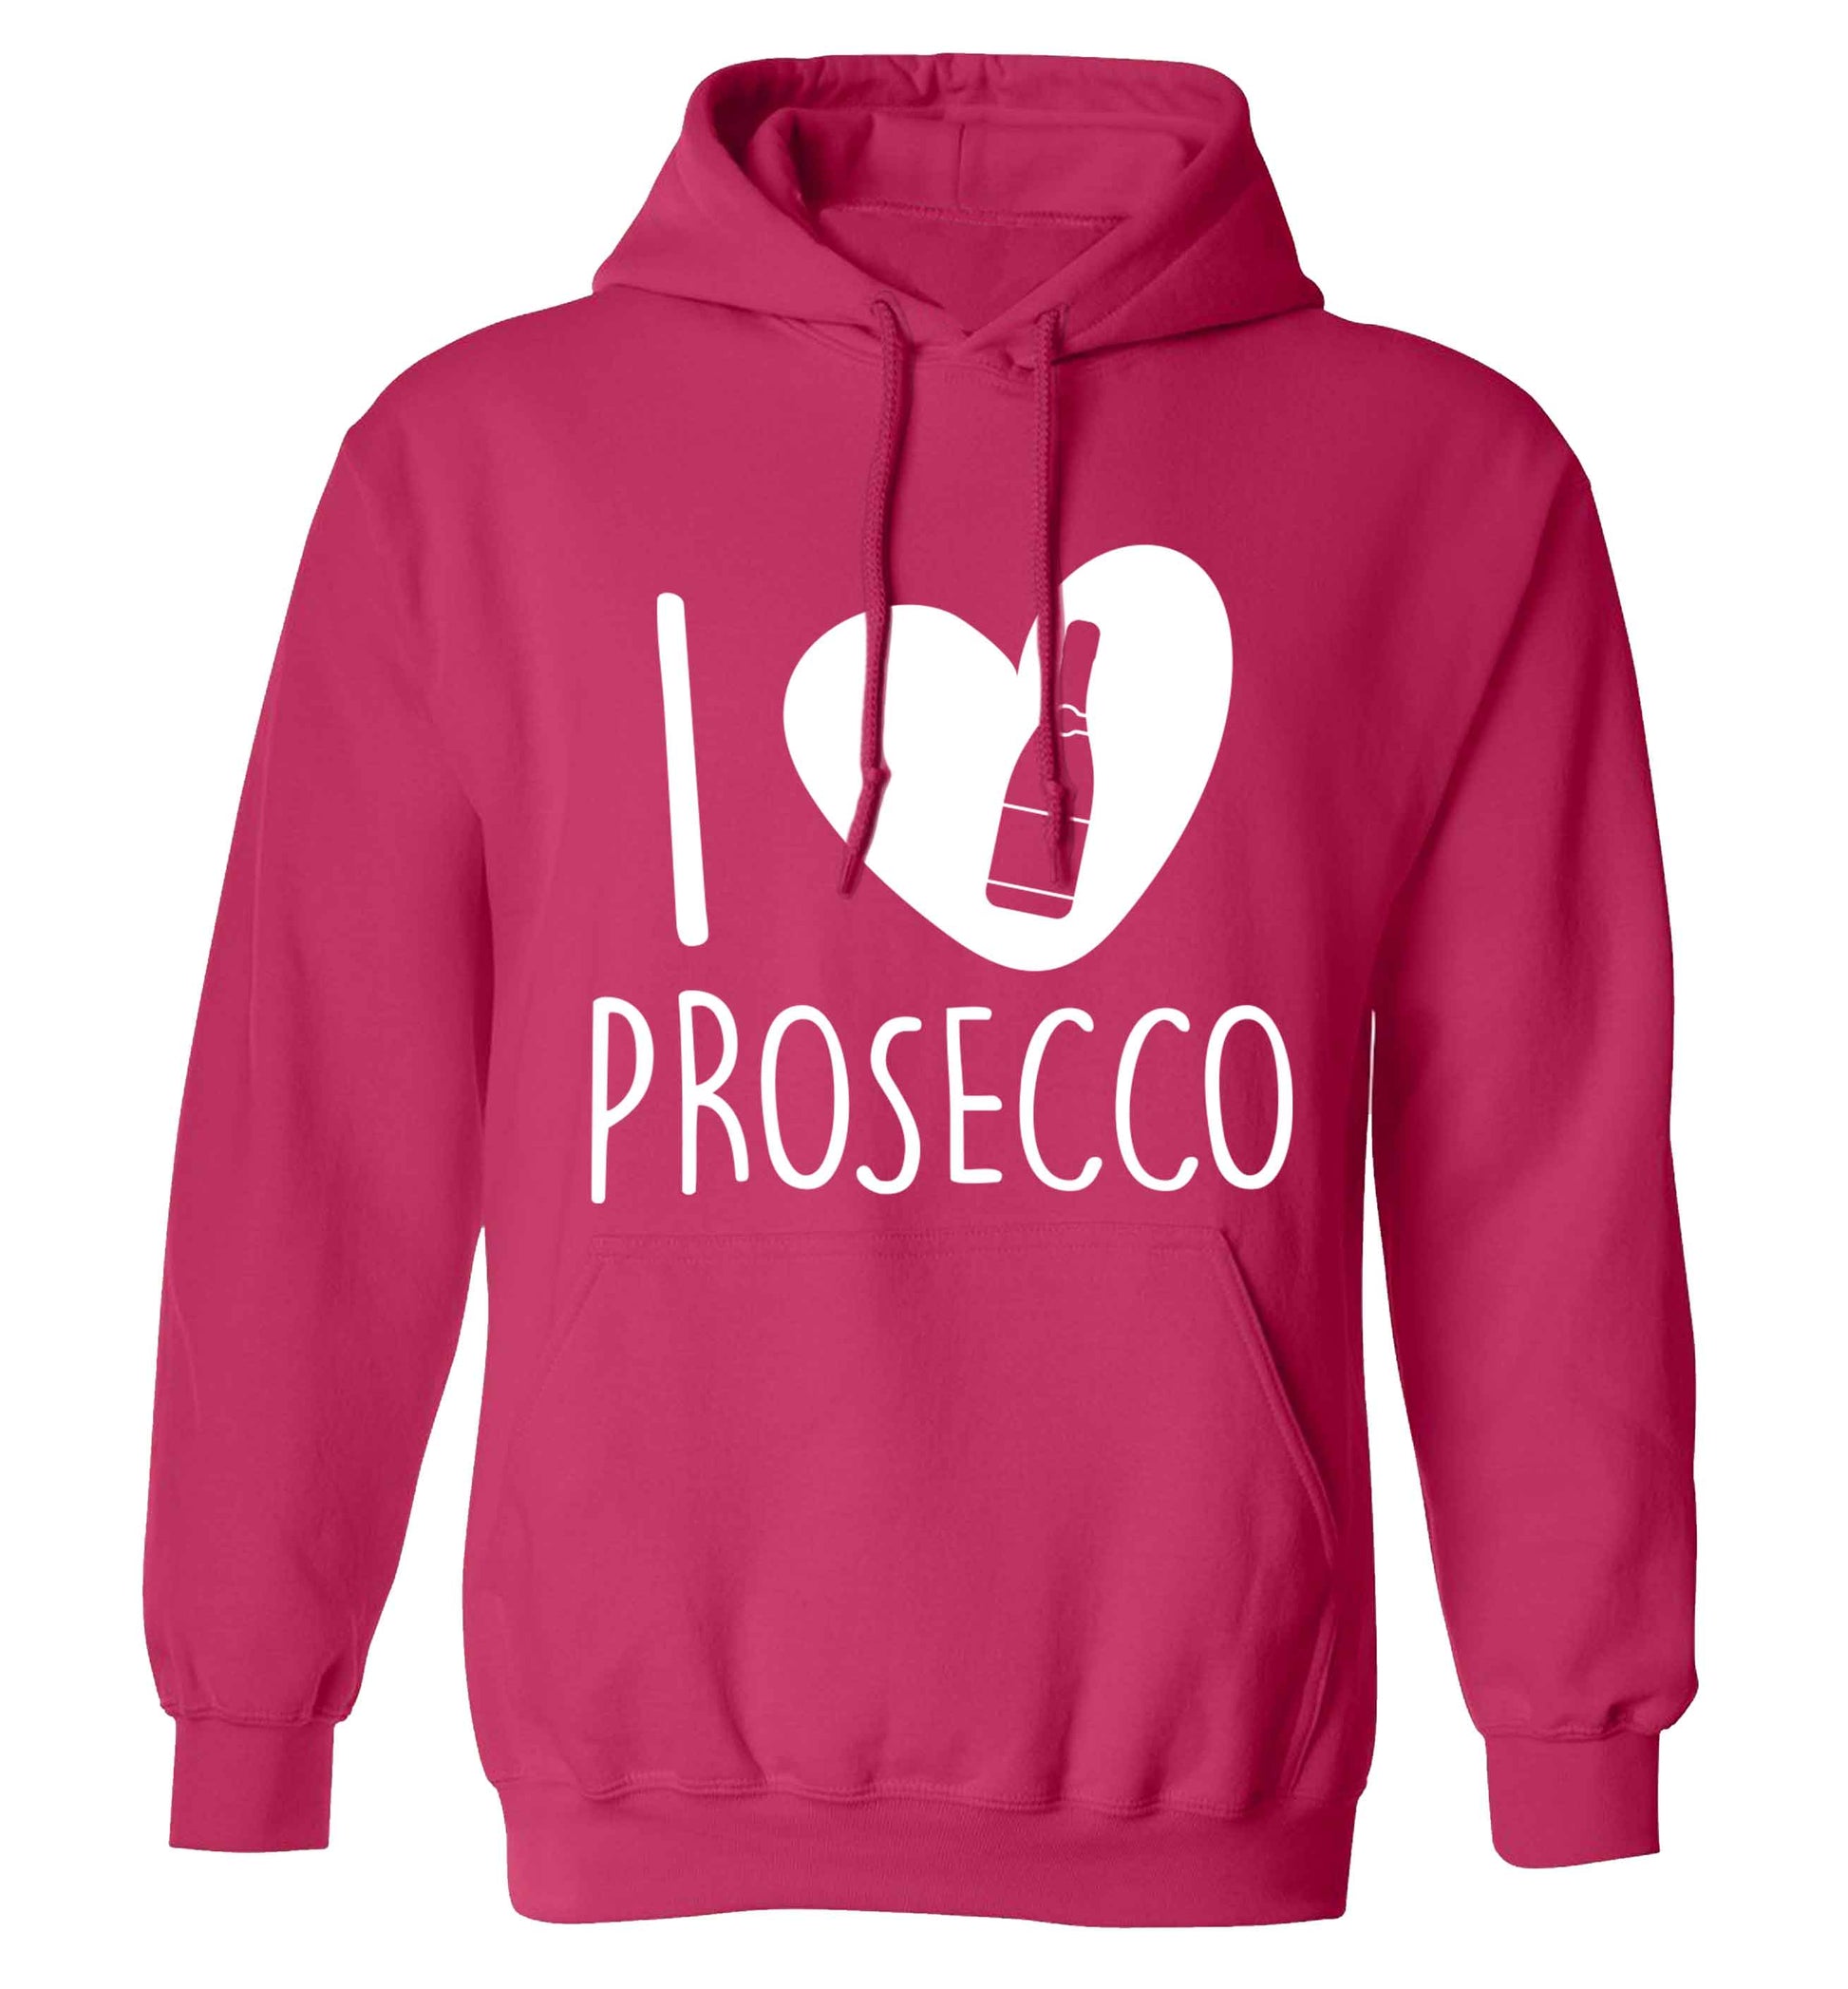 I love prosecco adults unisex pink hoodie 2XL